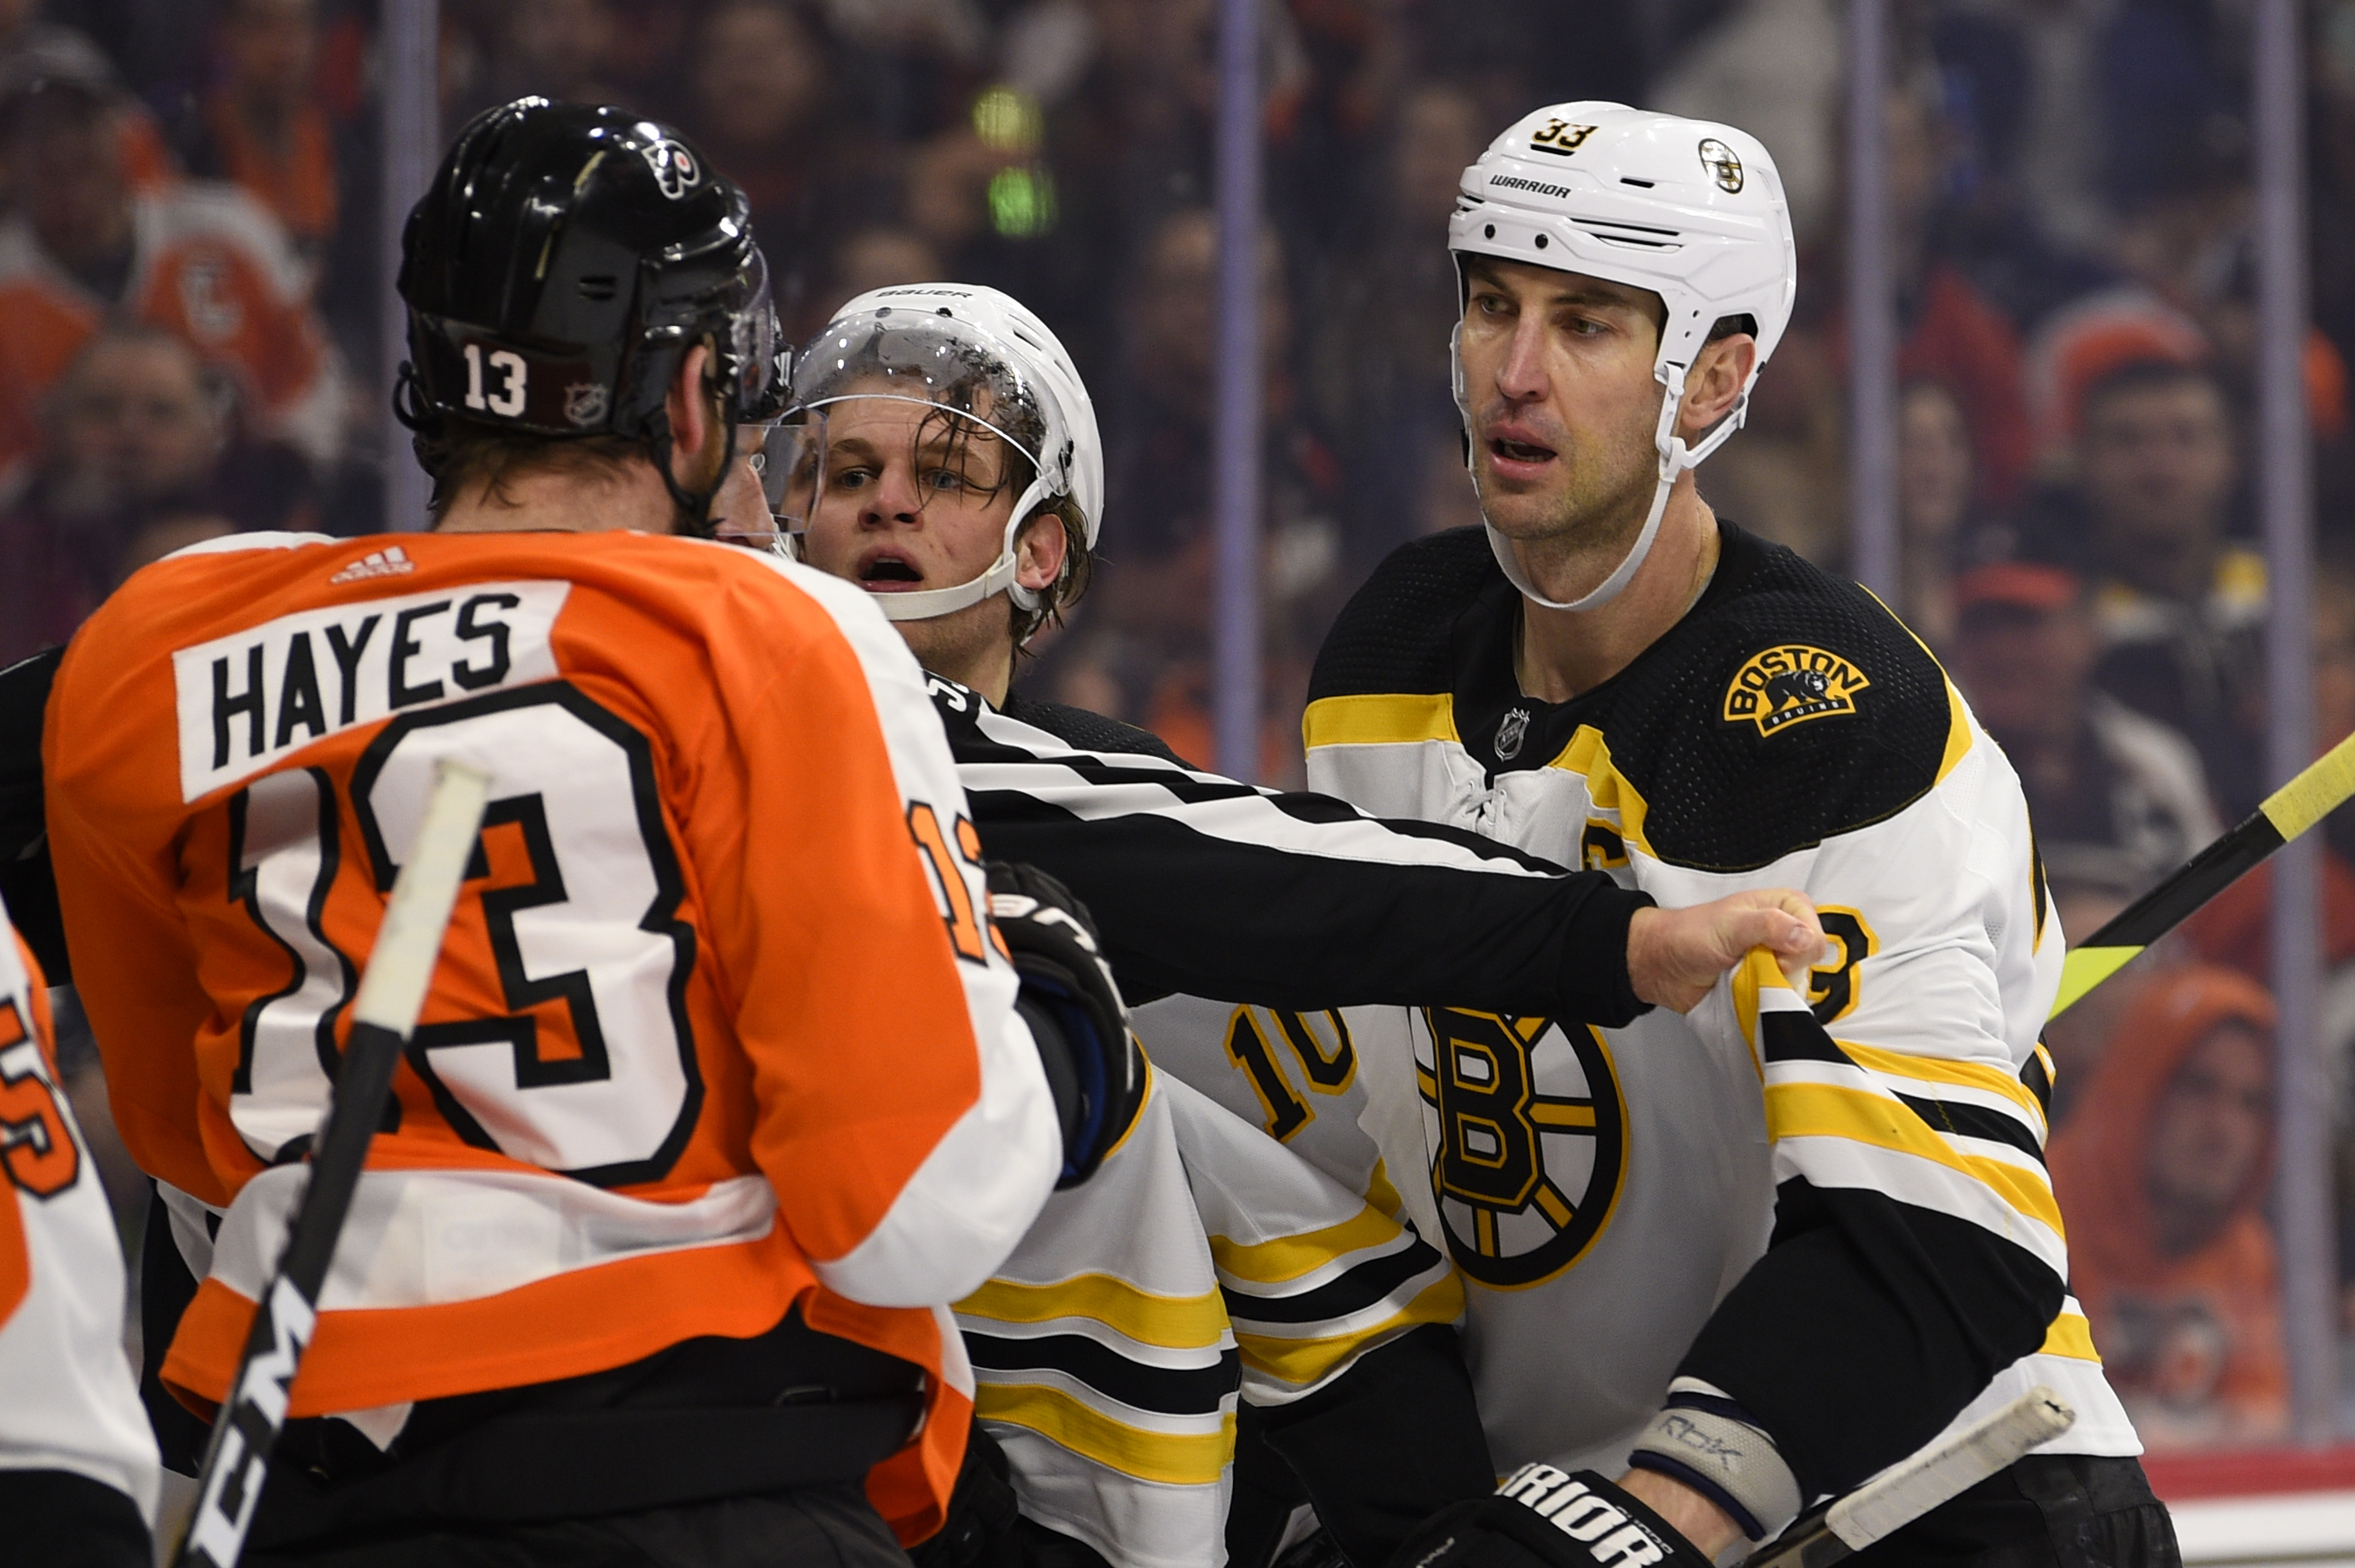 Boston Bruins trying return to Stanley Cup contender form in round-robin games beginning Sunday vs